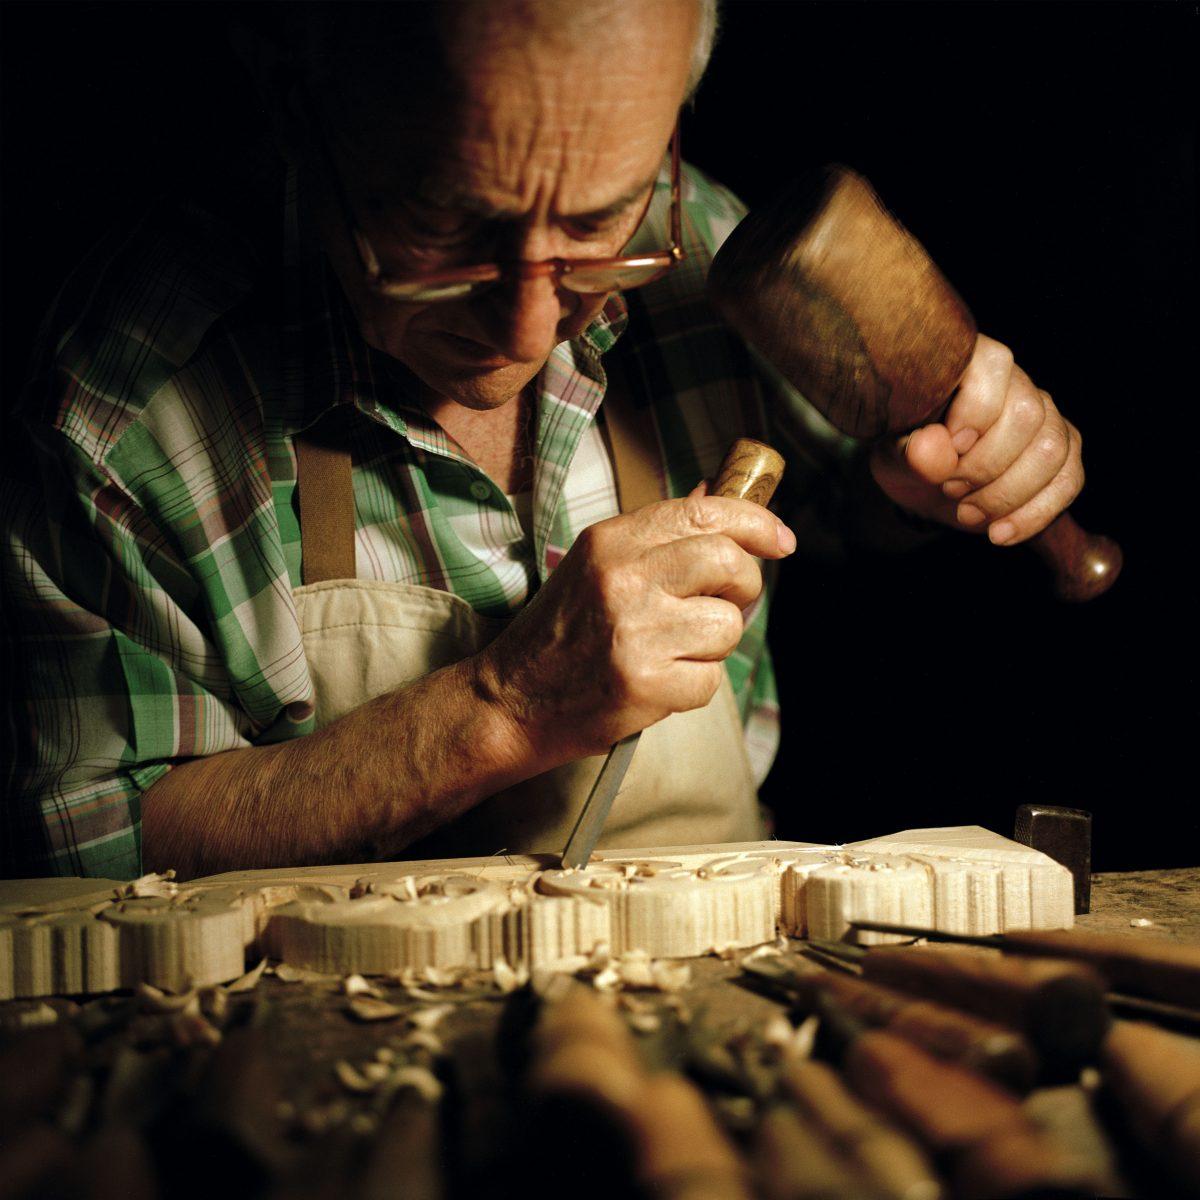 Master woodcarver Bruno Barbon has been skillfully wielding his hammer and chisel for over 50 years, making and restoring everything from ornaments to furniture. (Susanna Pozzoli/Michelangelo Foundation for Creativity and Craftsmanship)